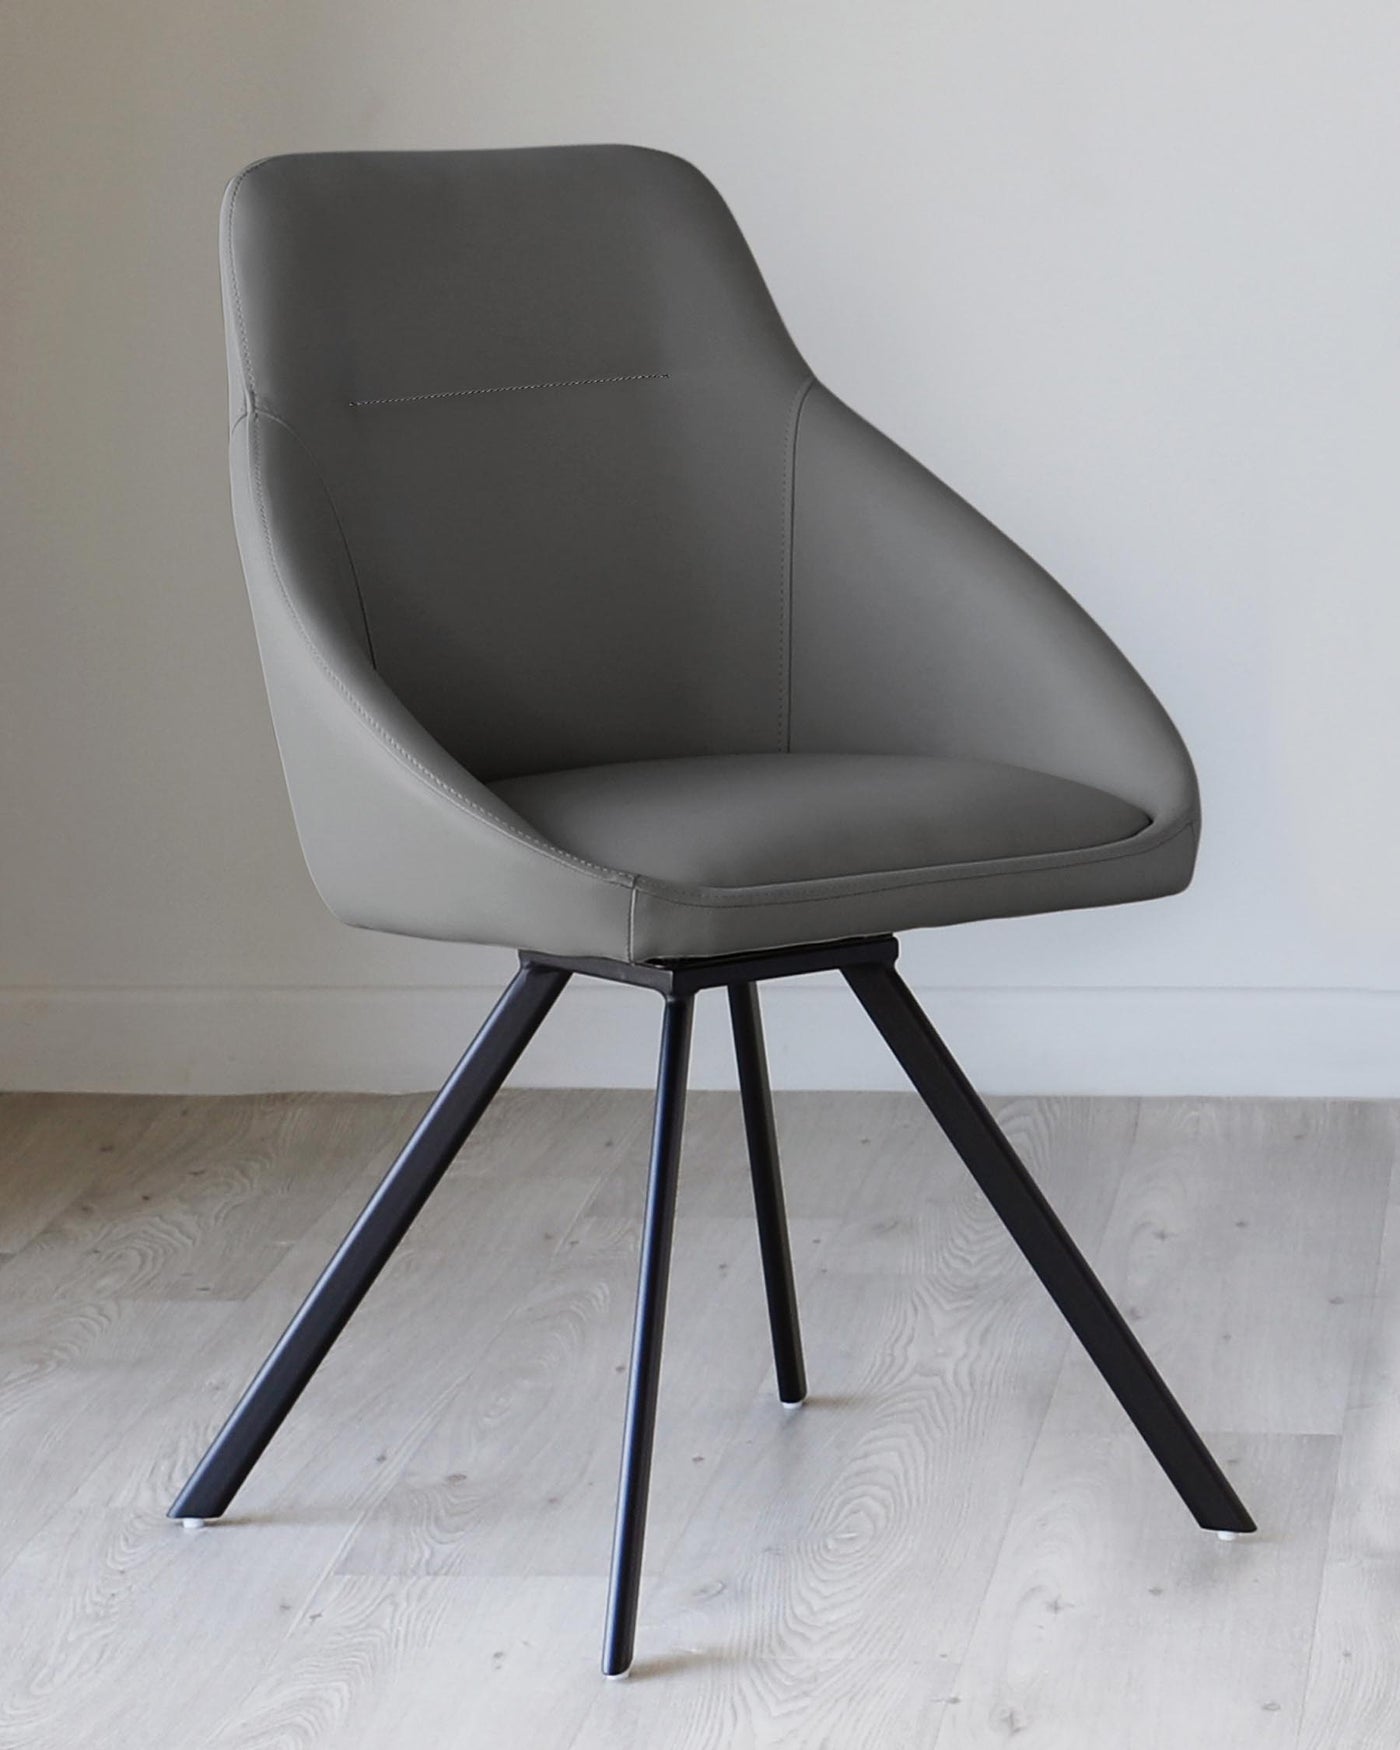 Modern grey upholstered dining chair with a curved backrest and minimalist stitch detailing, set on a sleek black four-legged metal base.